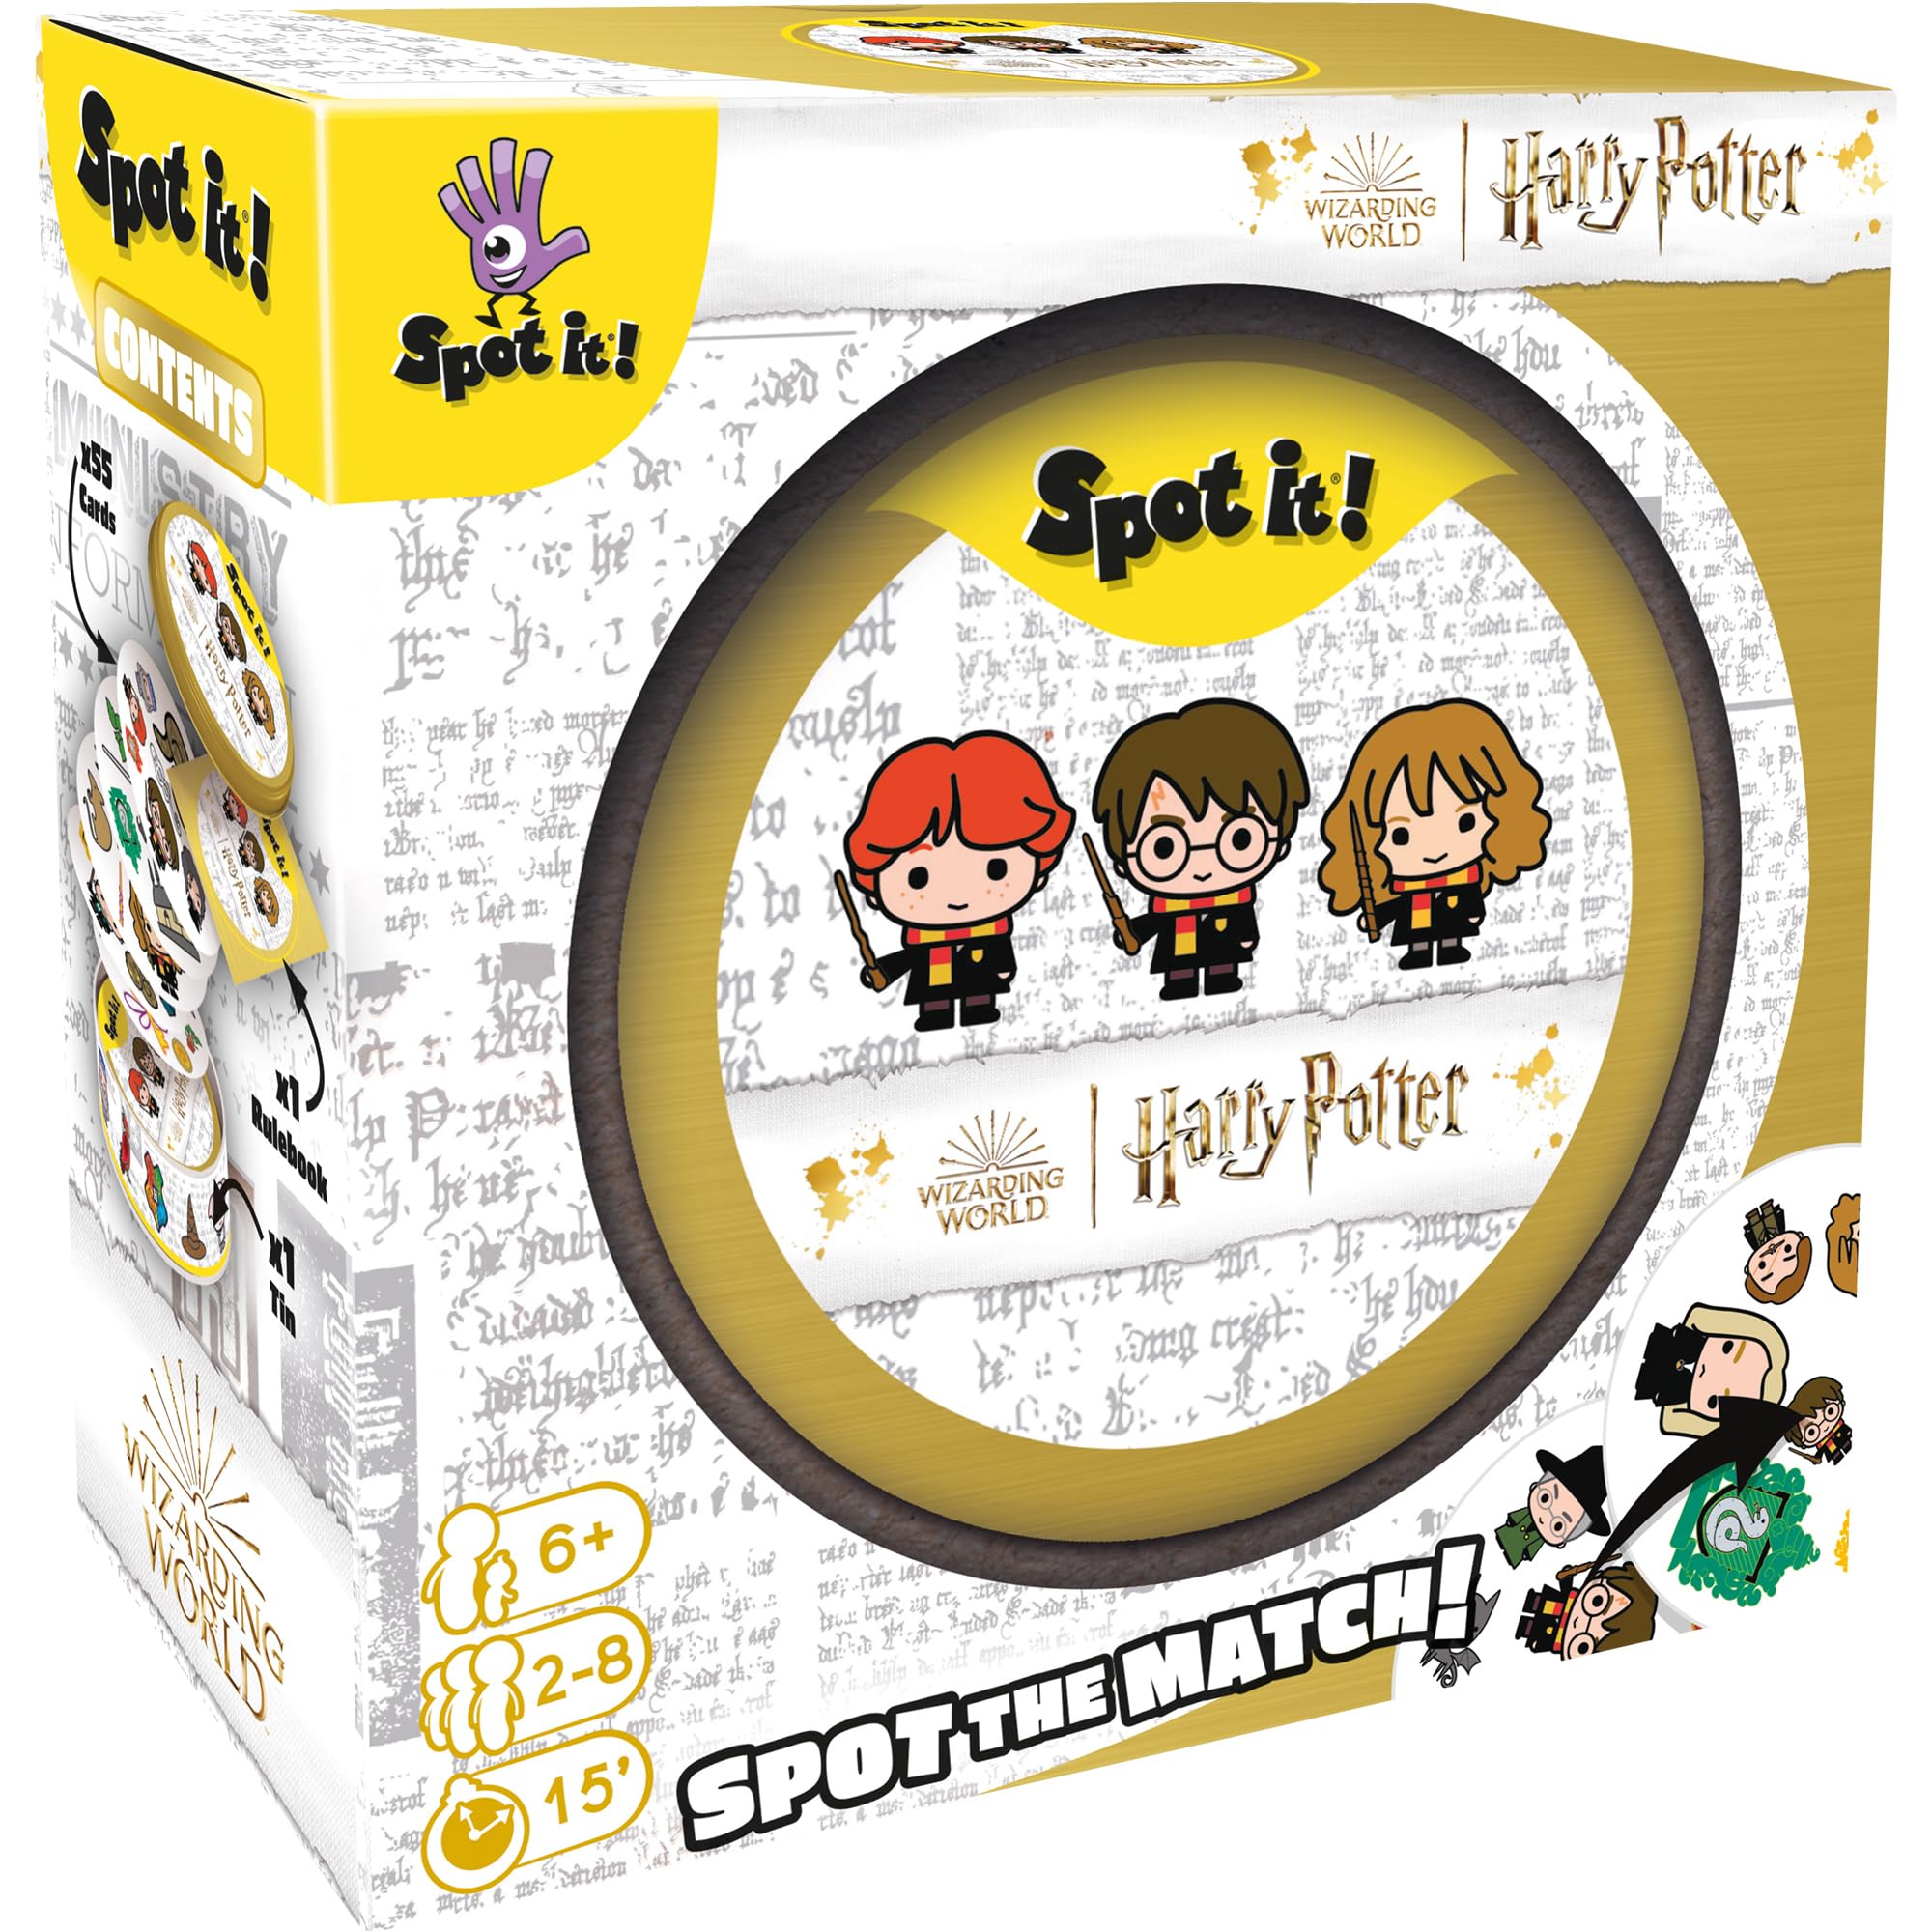 Zygomatic Spot It! Harry Potter Card Game (Eco-Blister) - Magical Matching Fun for Kids and Family, Ages 6+, 2-8 Players, 15 Minute Playtime, Made